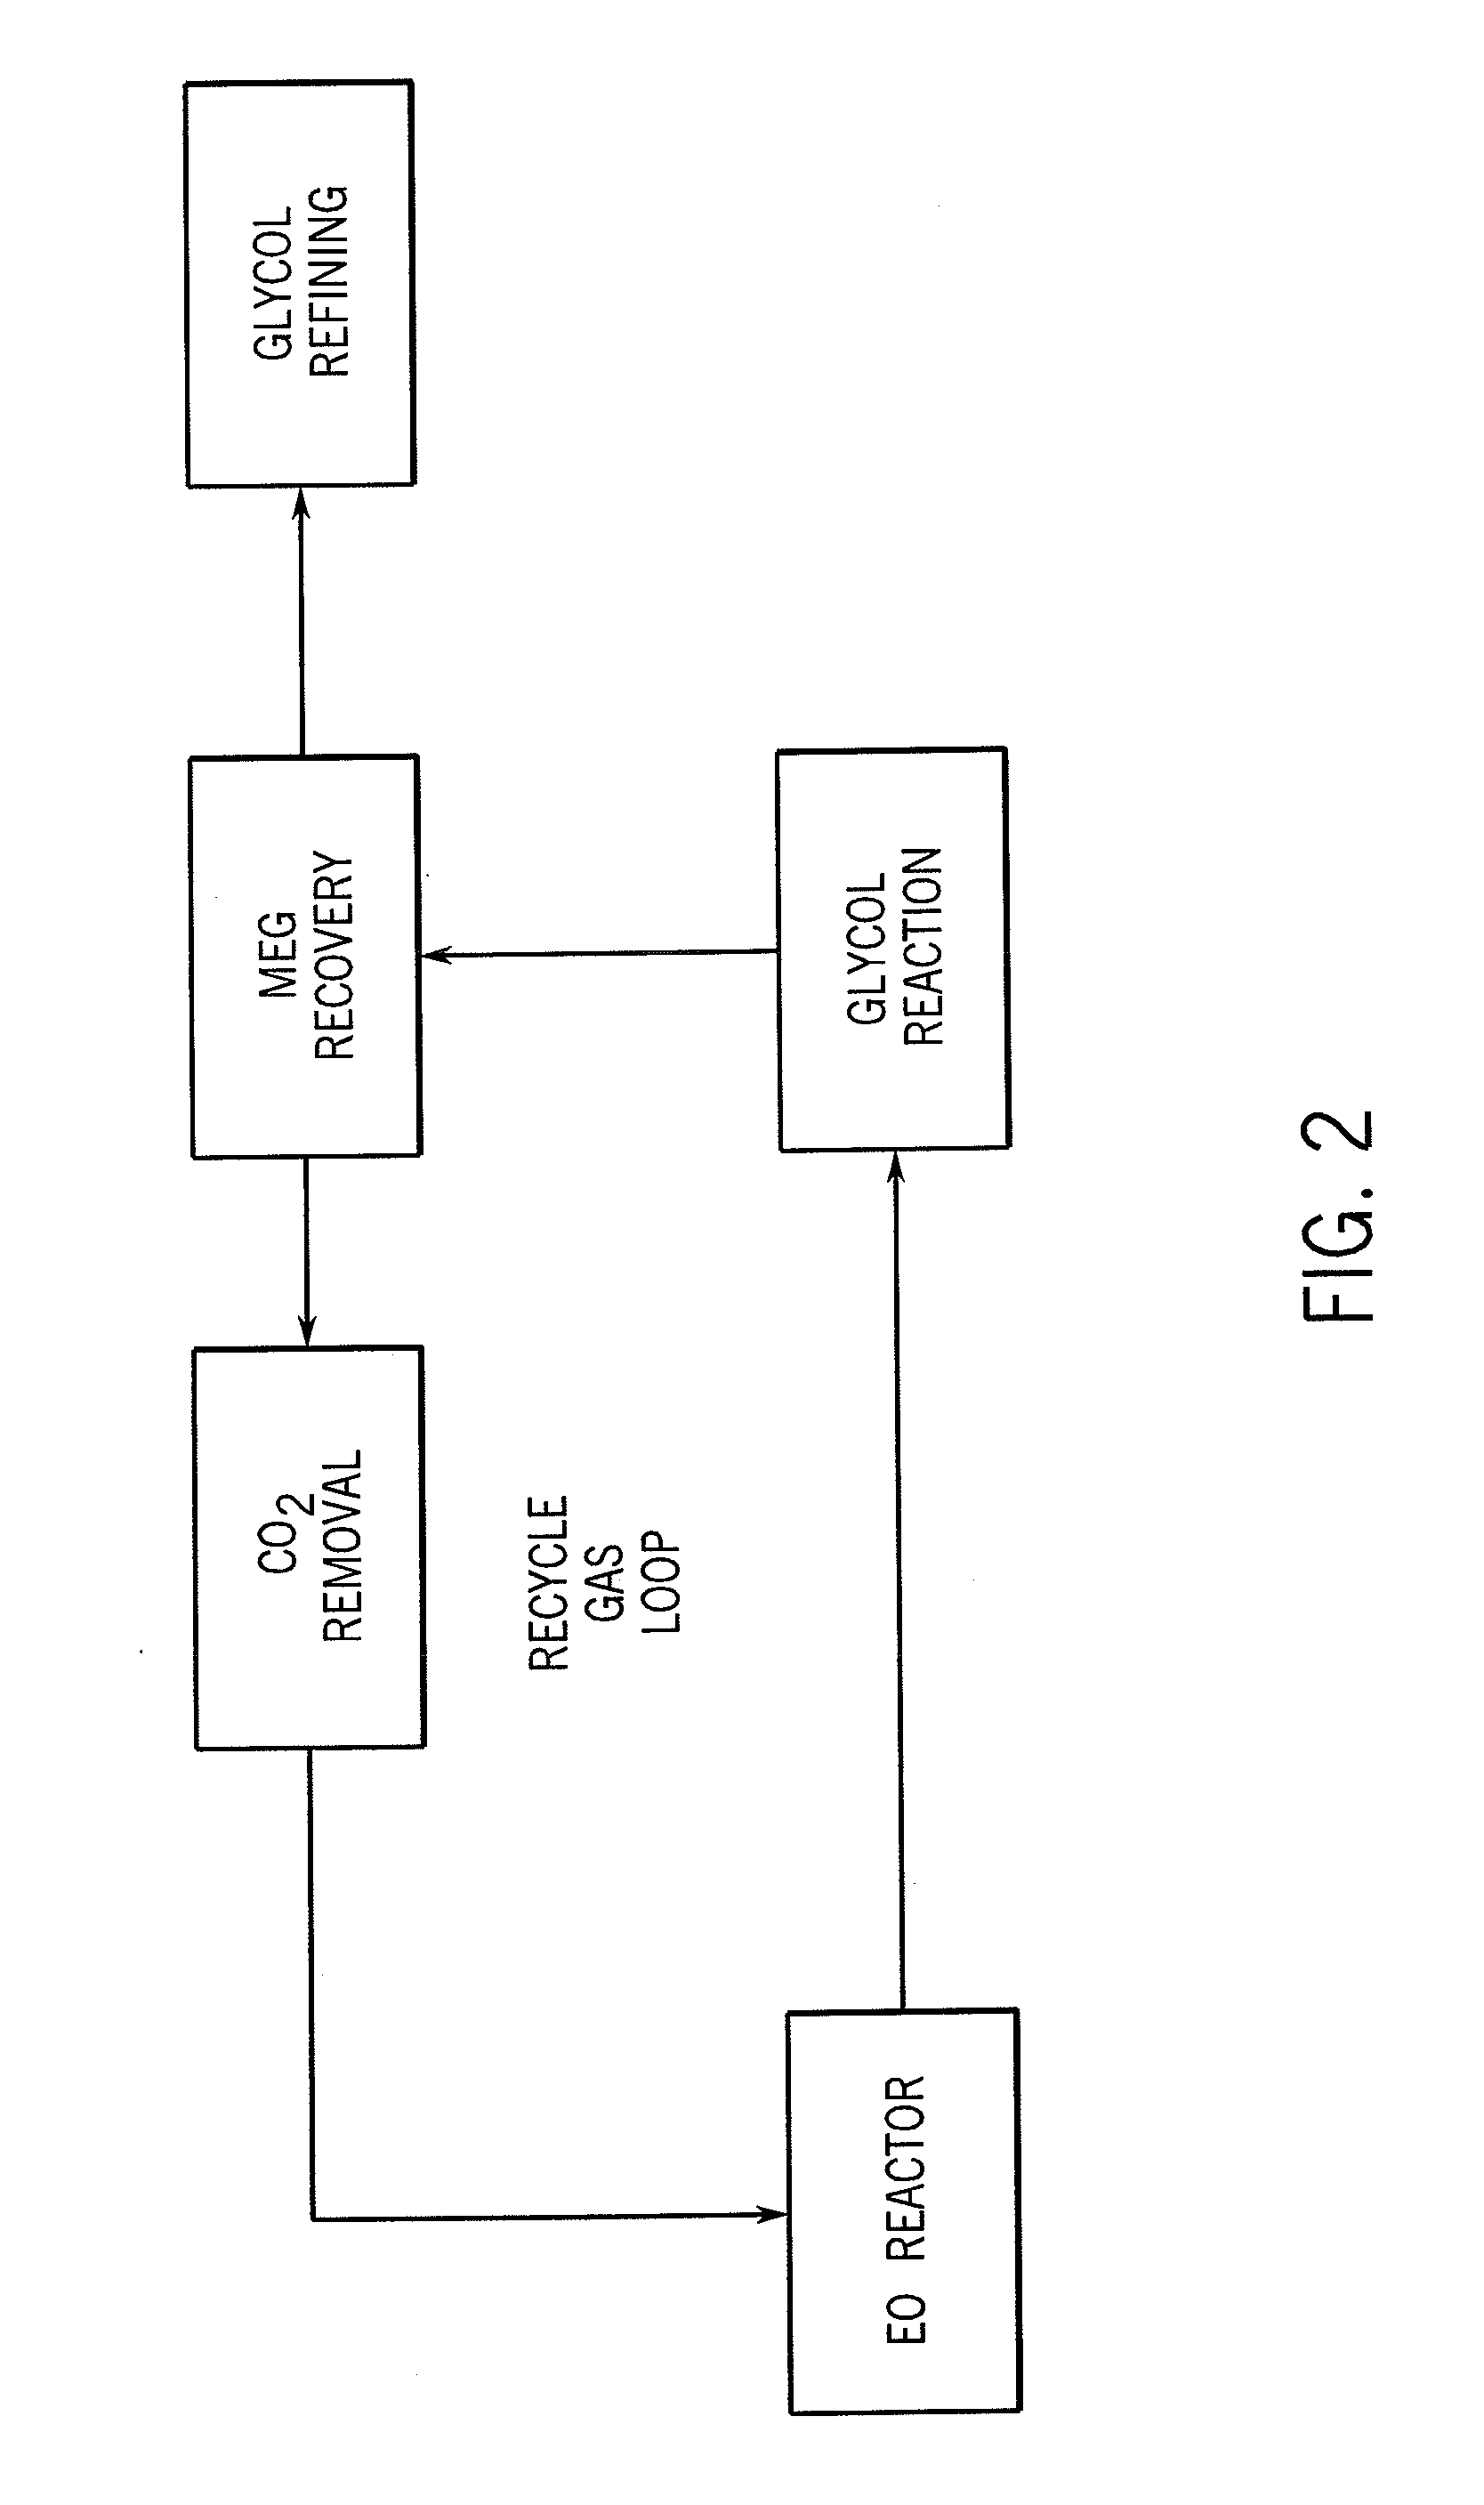 Two-Stage, Gas Phase Process for the Manufacture of Alkylene Glycol